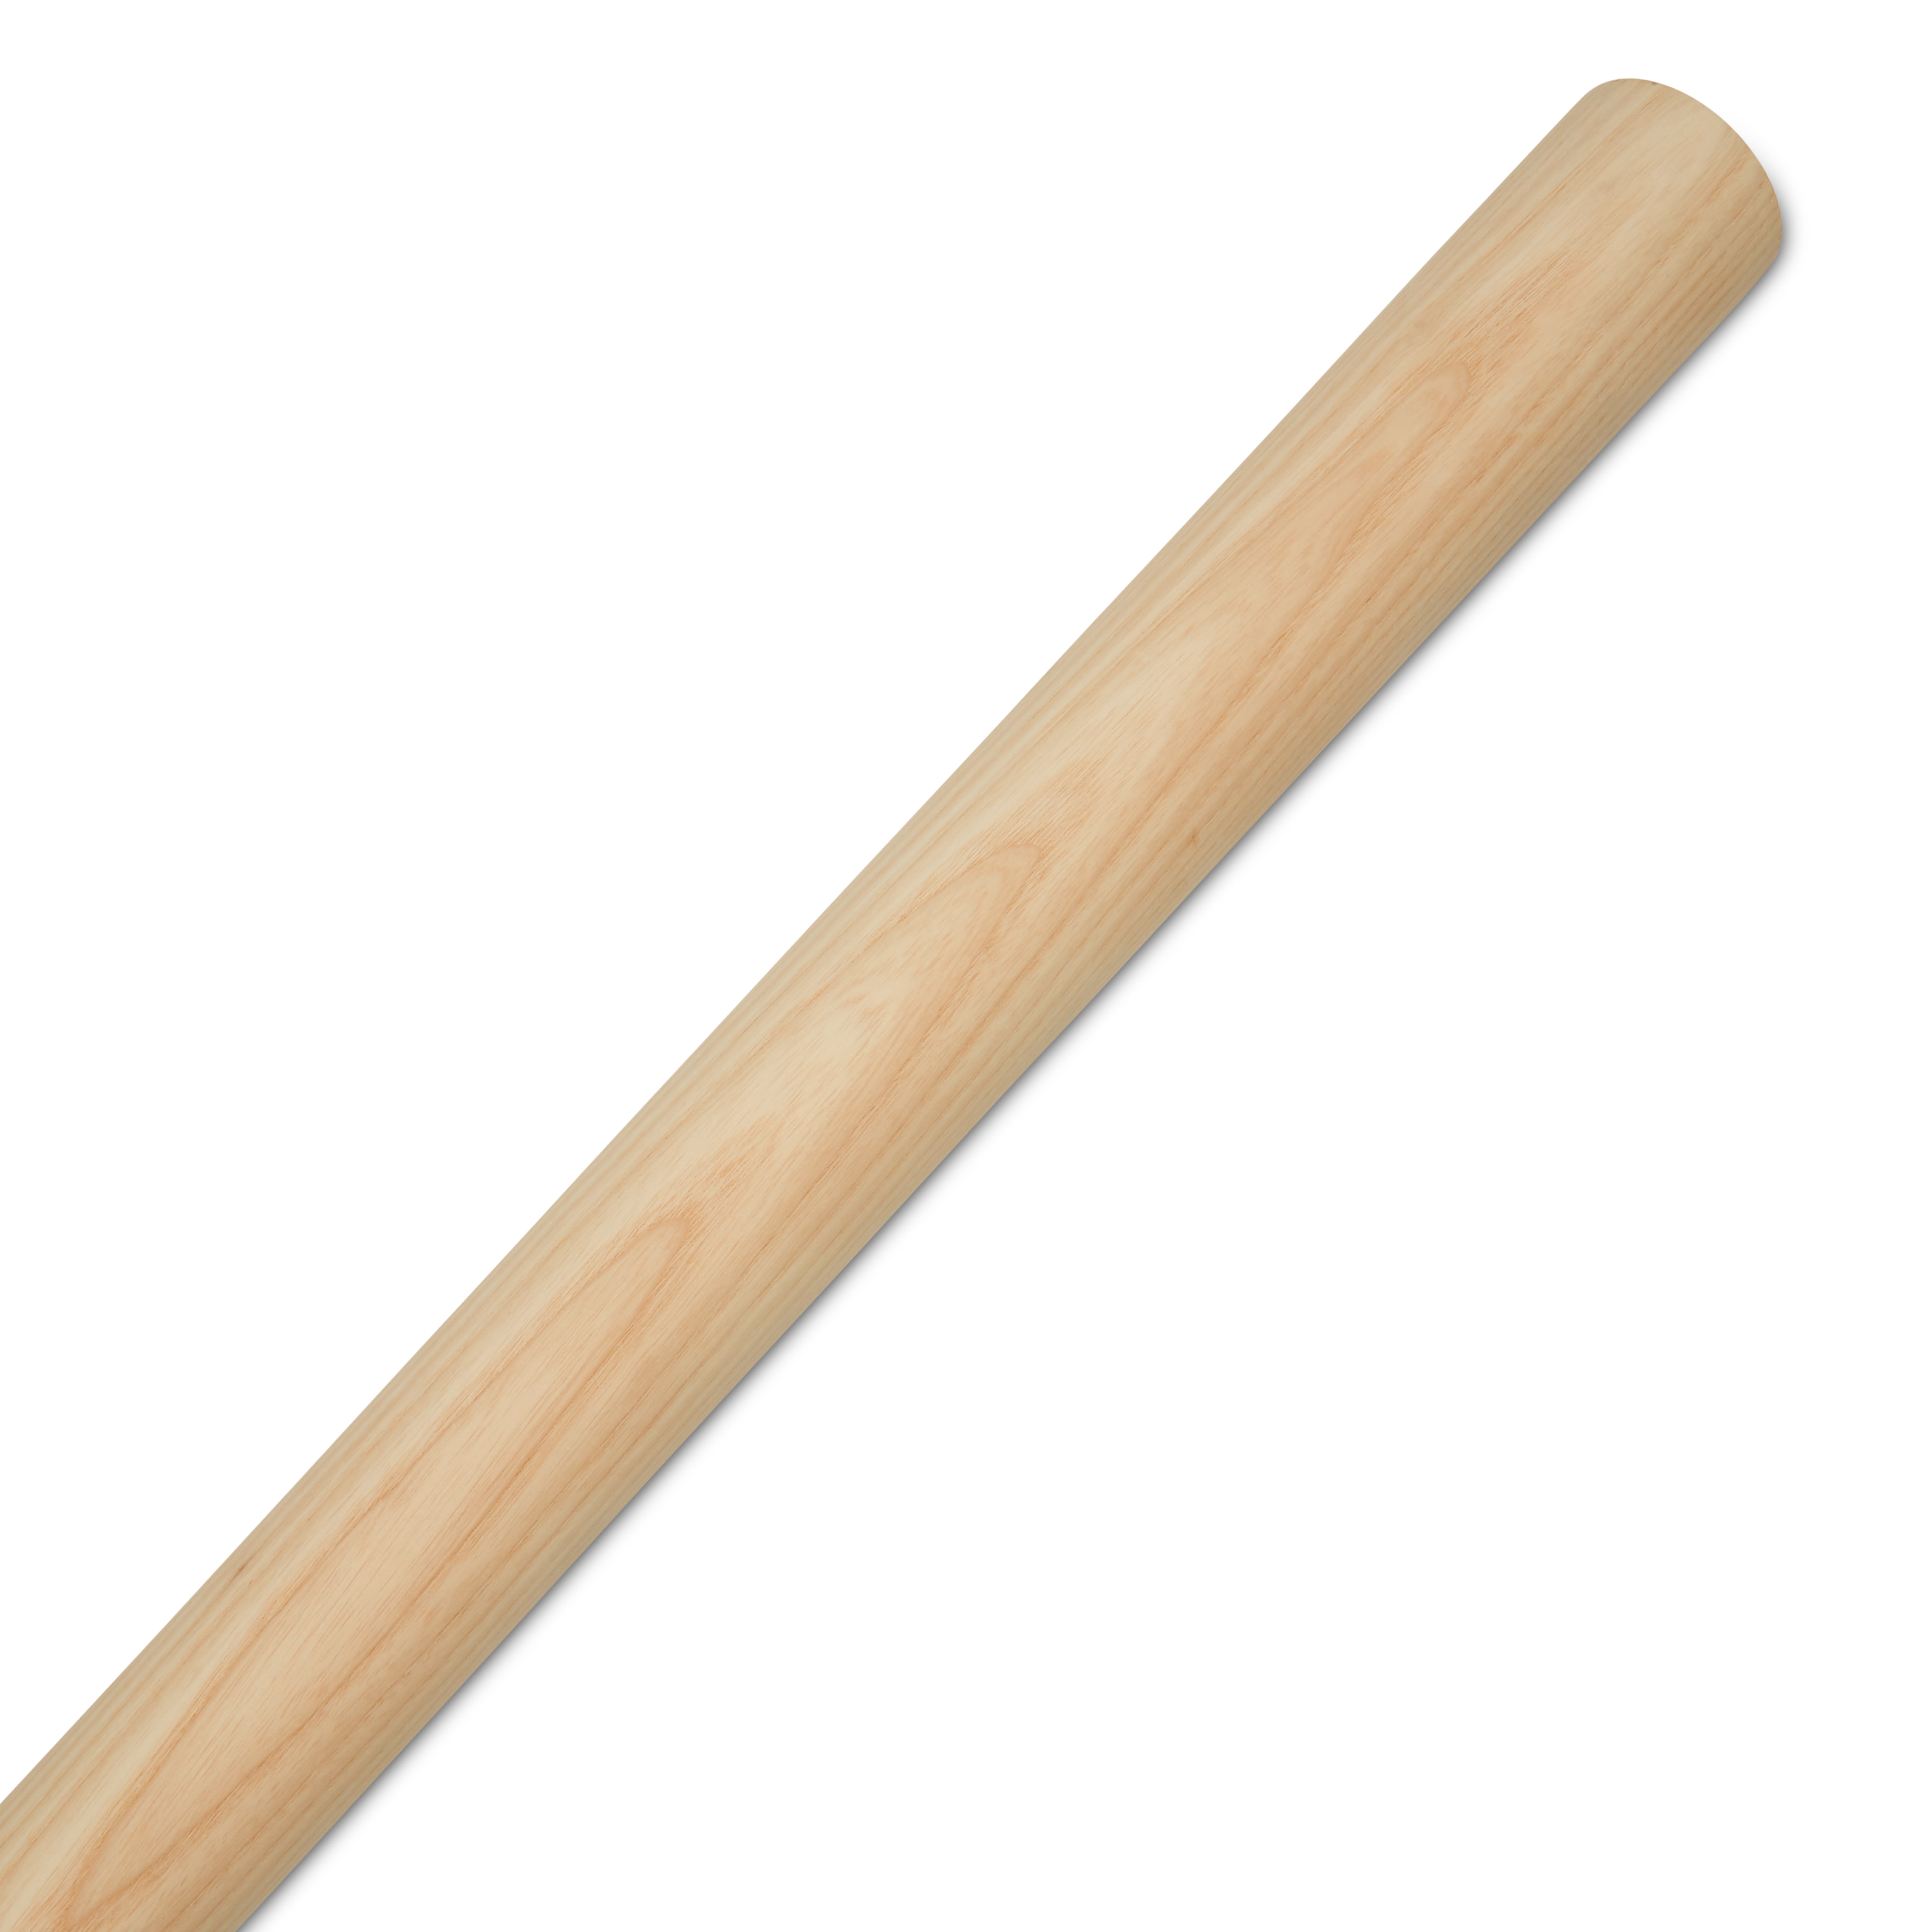 Woodpeckers Dowel Rods Wood Sticks 3/16 x 36 inch Unfinished Hardwood Sticks for Crafts and DIY'ers 100 Pieces